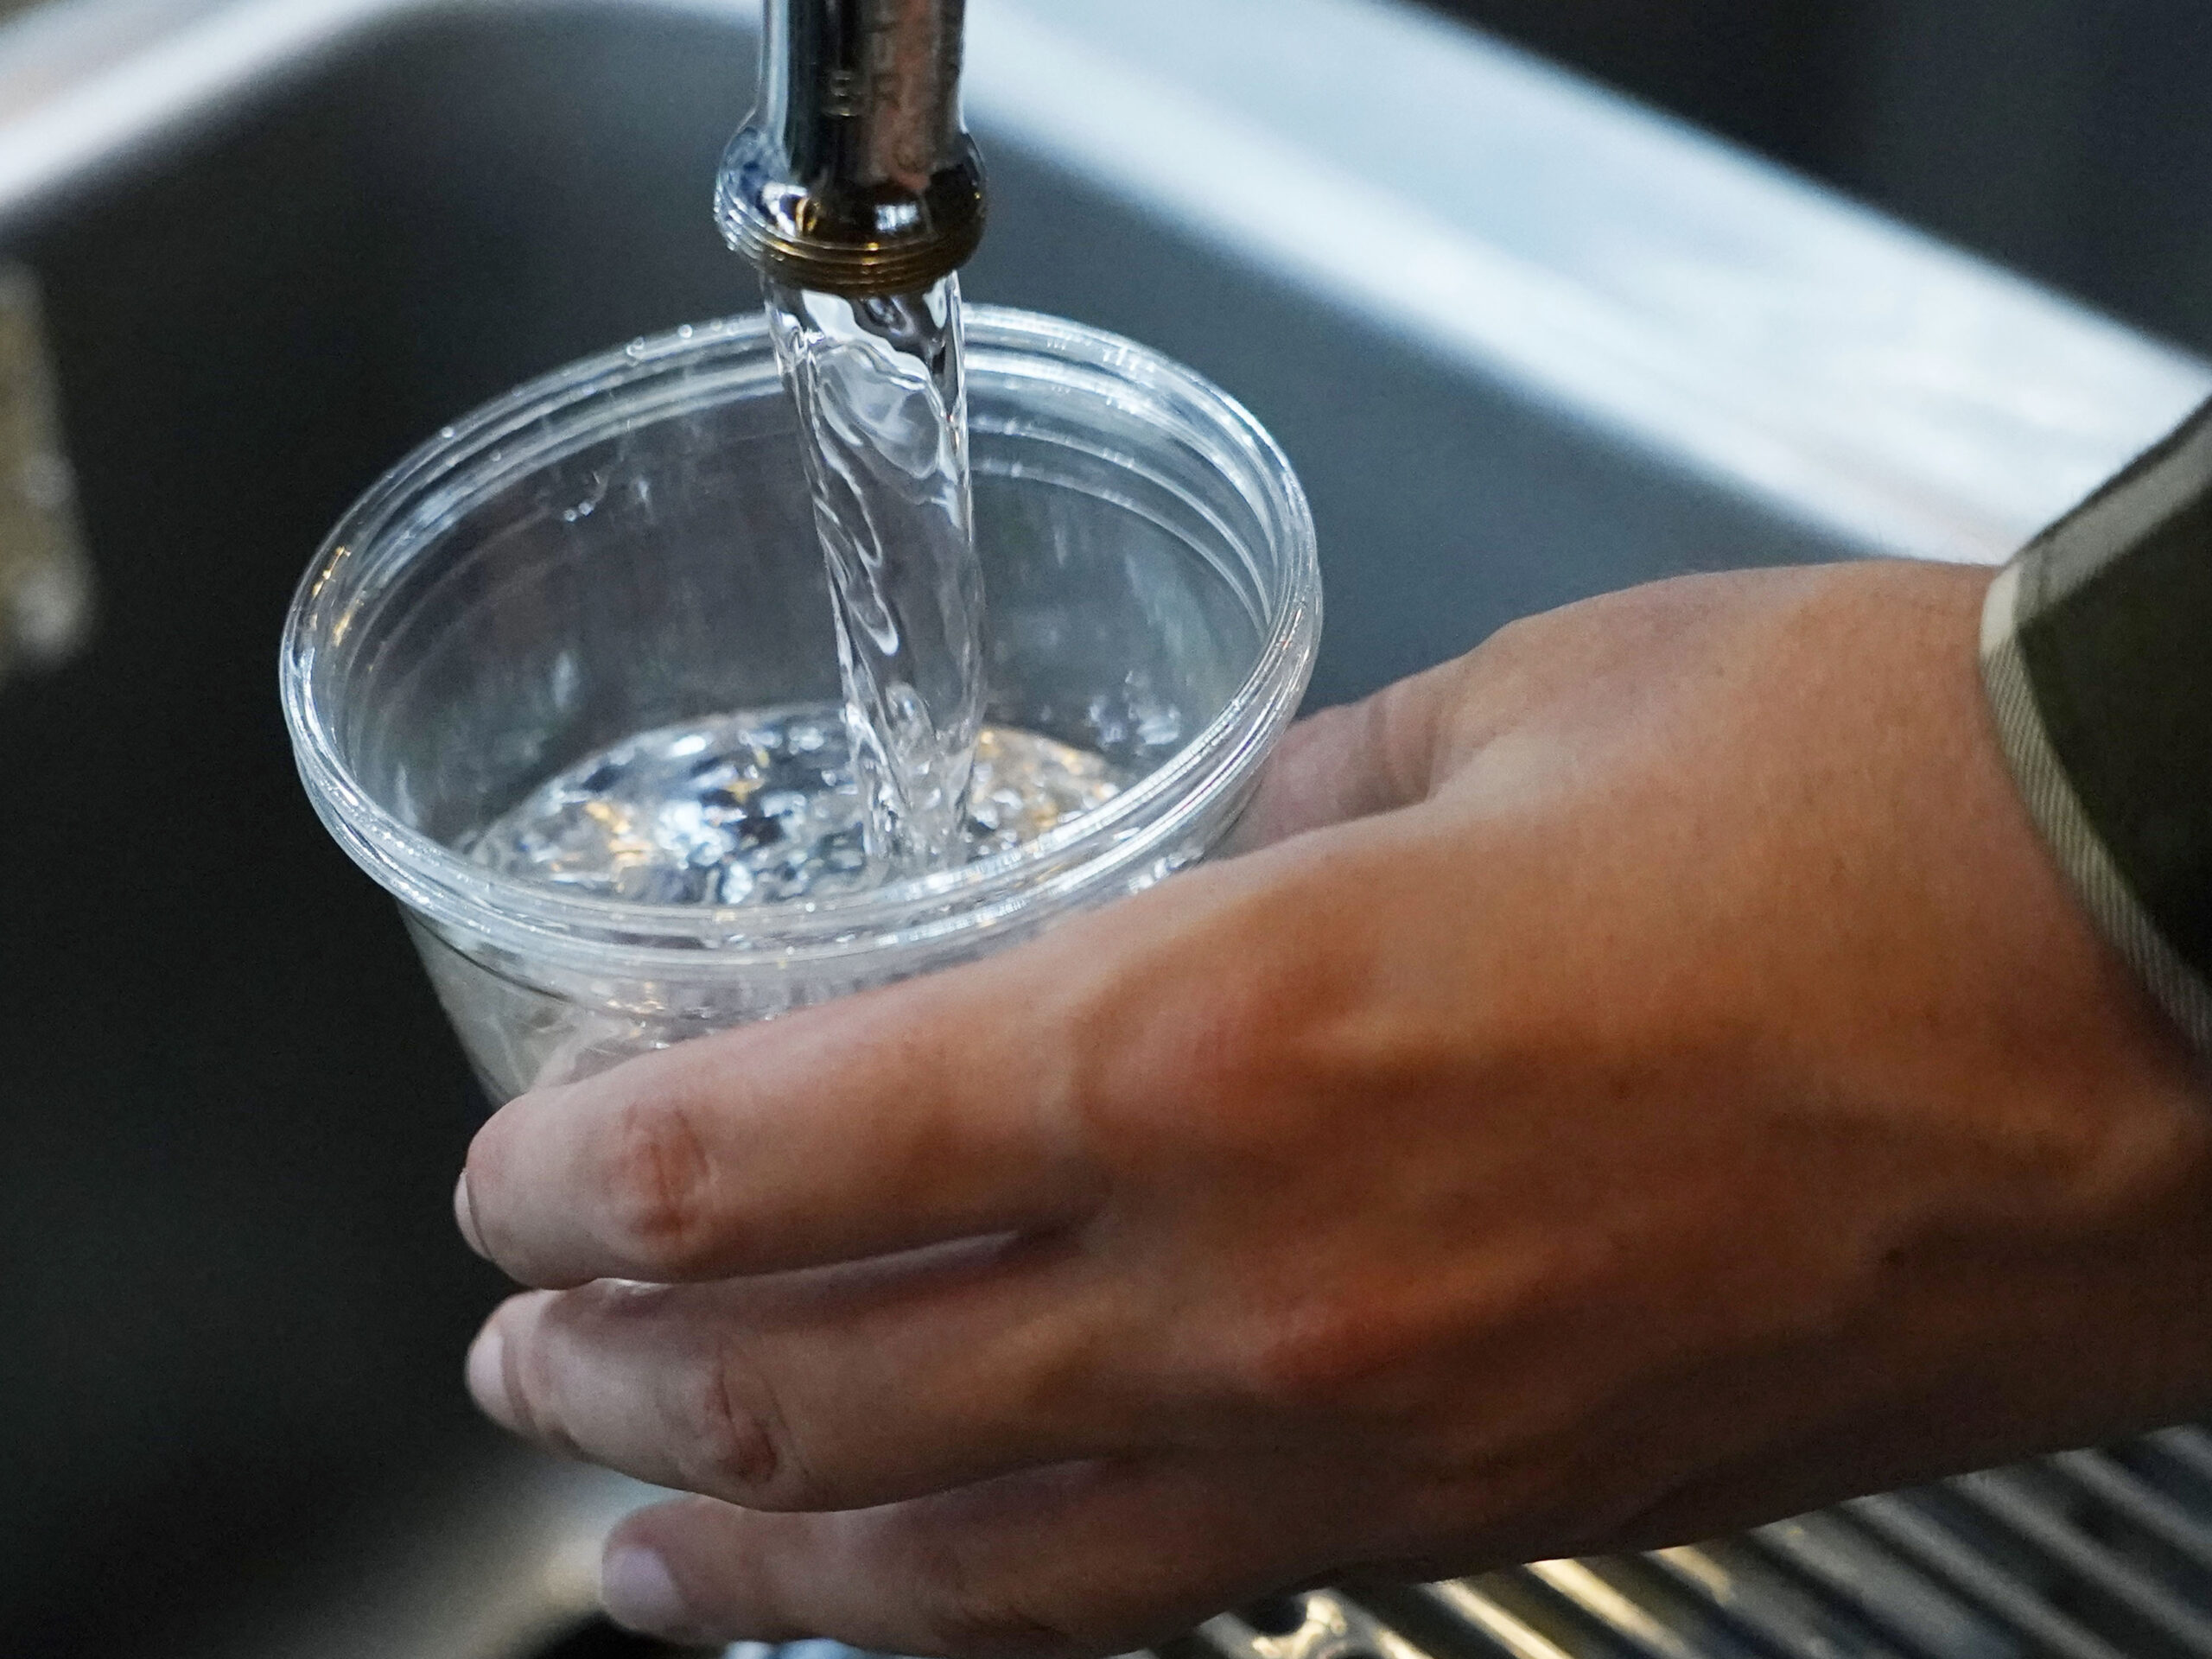 EPA is limiting PFAS chemicals in drinking water in the U.S.